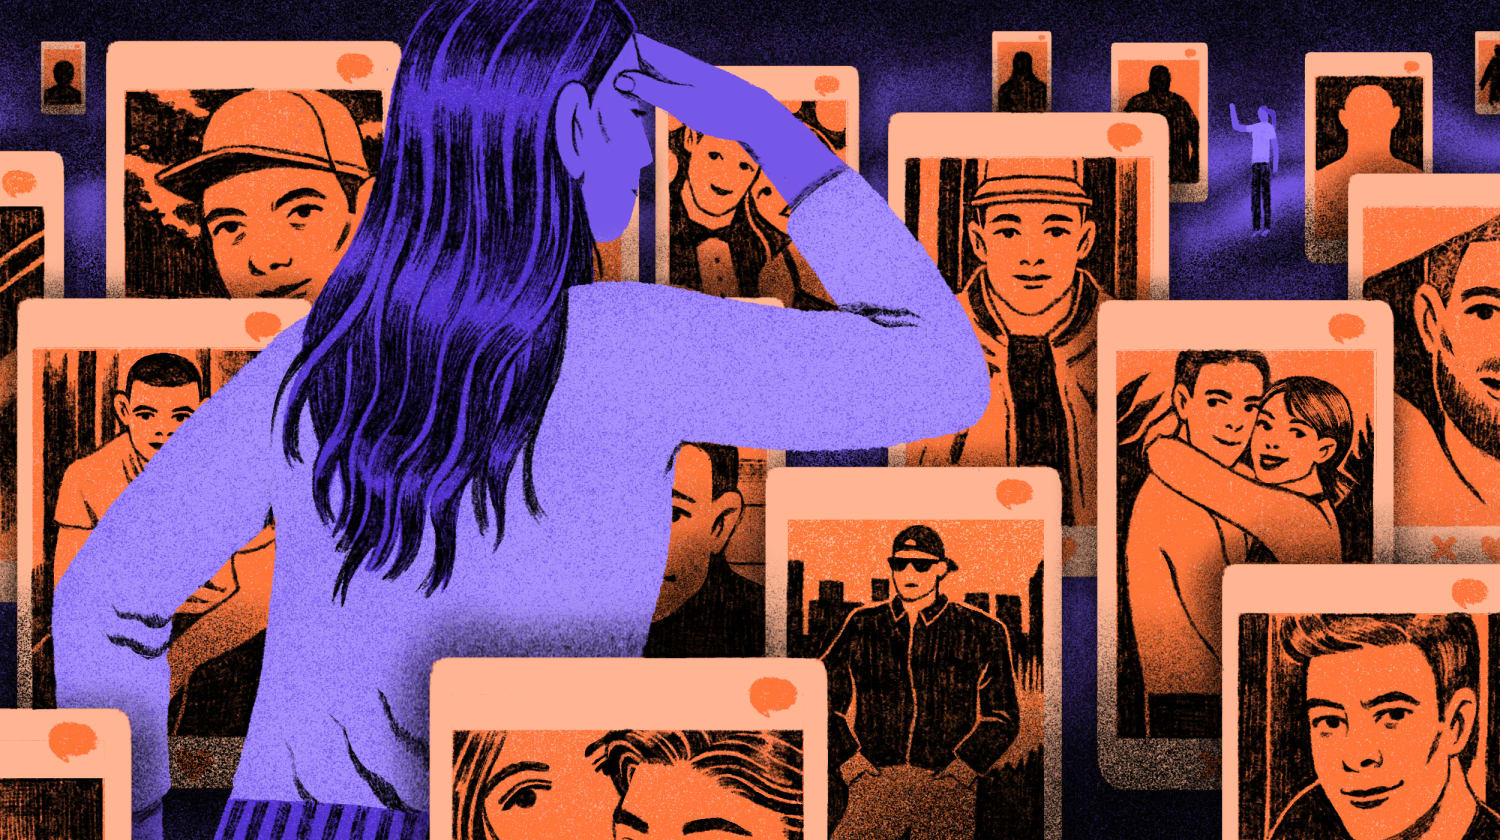 Looking for love on Tinder? Lesbians must first swipe past a parade of straight image